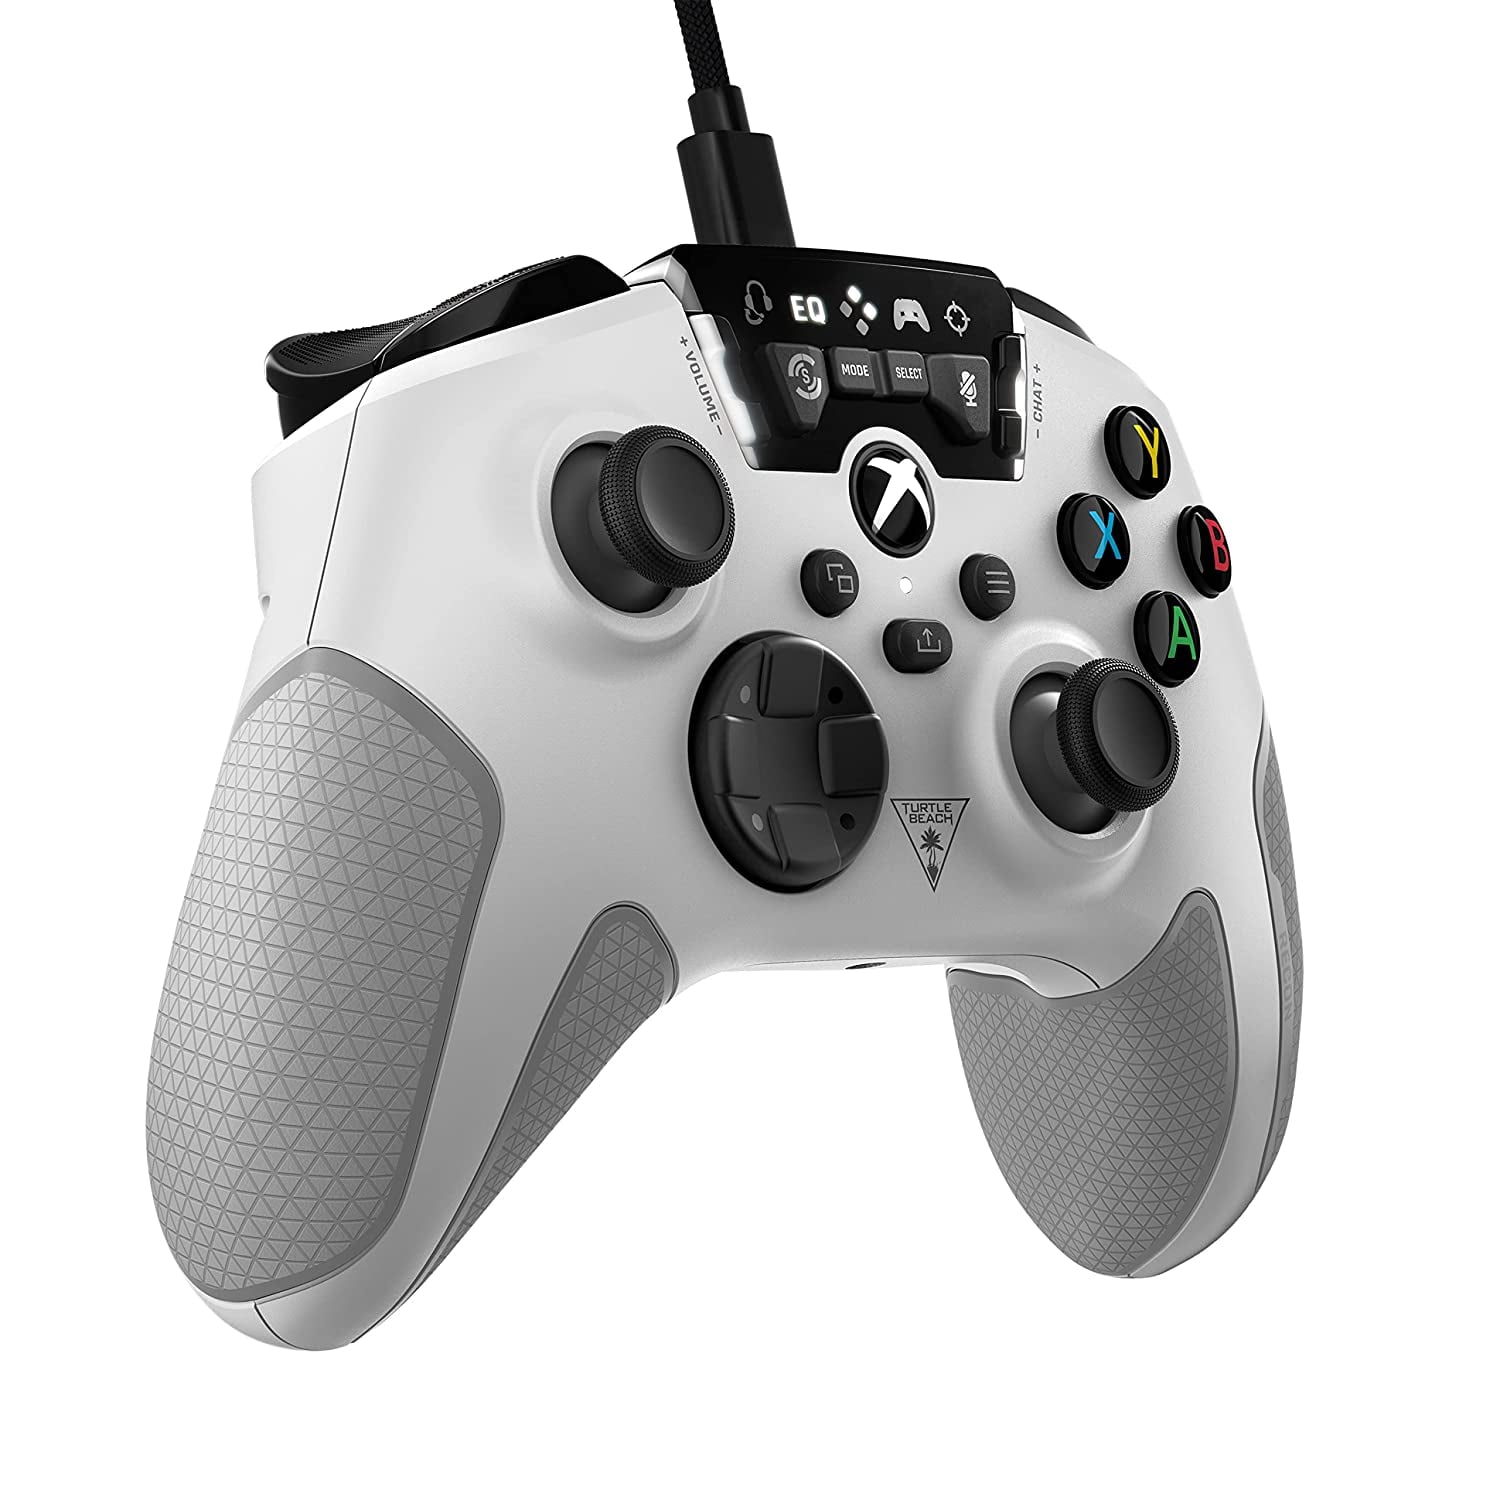 & Enhancements, Hearing and Superhuman Series Gaming Buttons, Xbox & Series Xbox Recon X 10 PCs White Audio Controller Xbox Wired Controller for Featuring - Beach Turtle S, Remappable One Windows